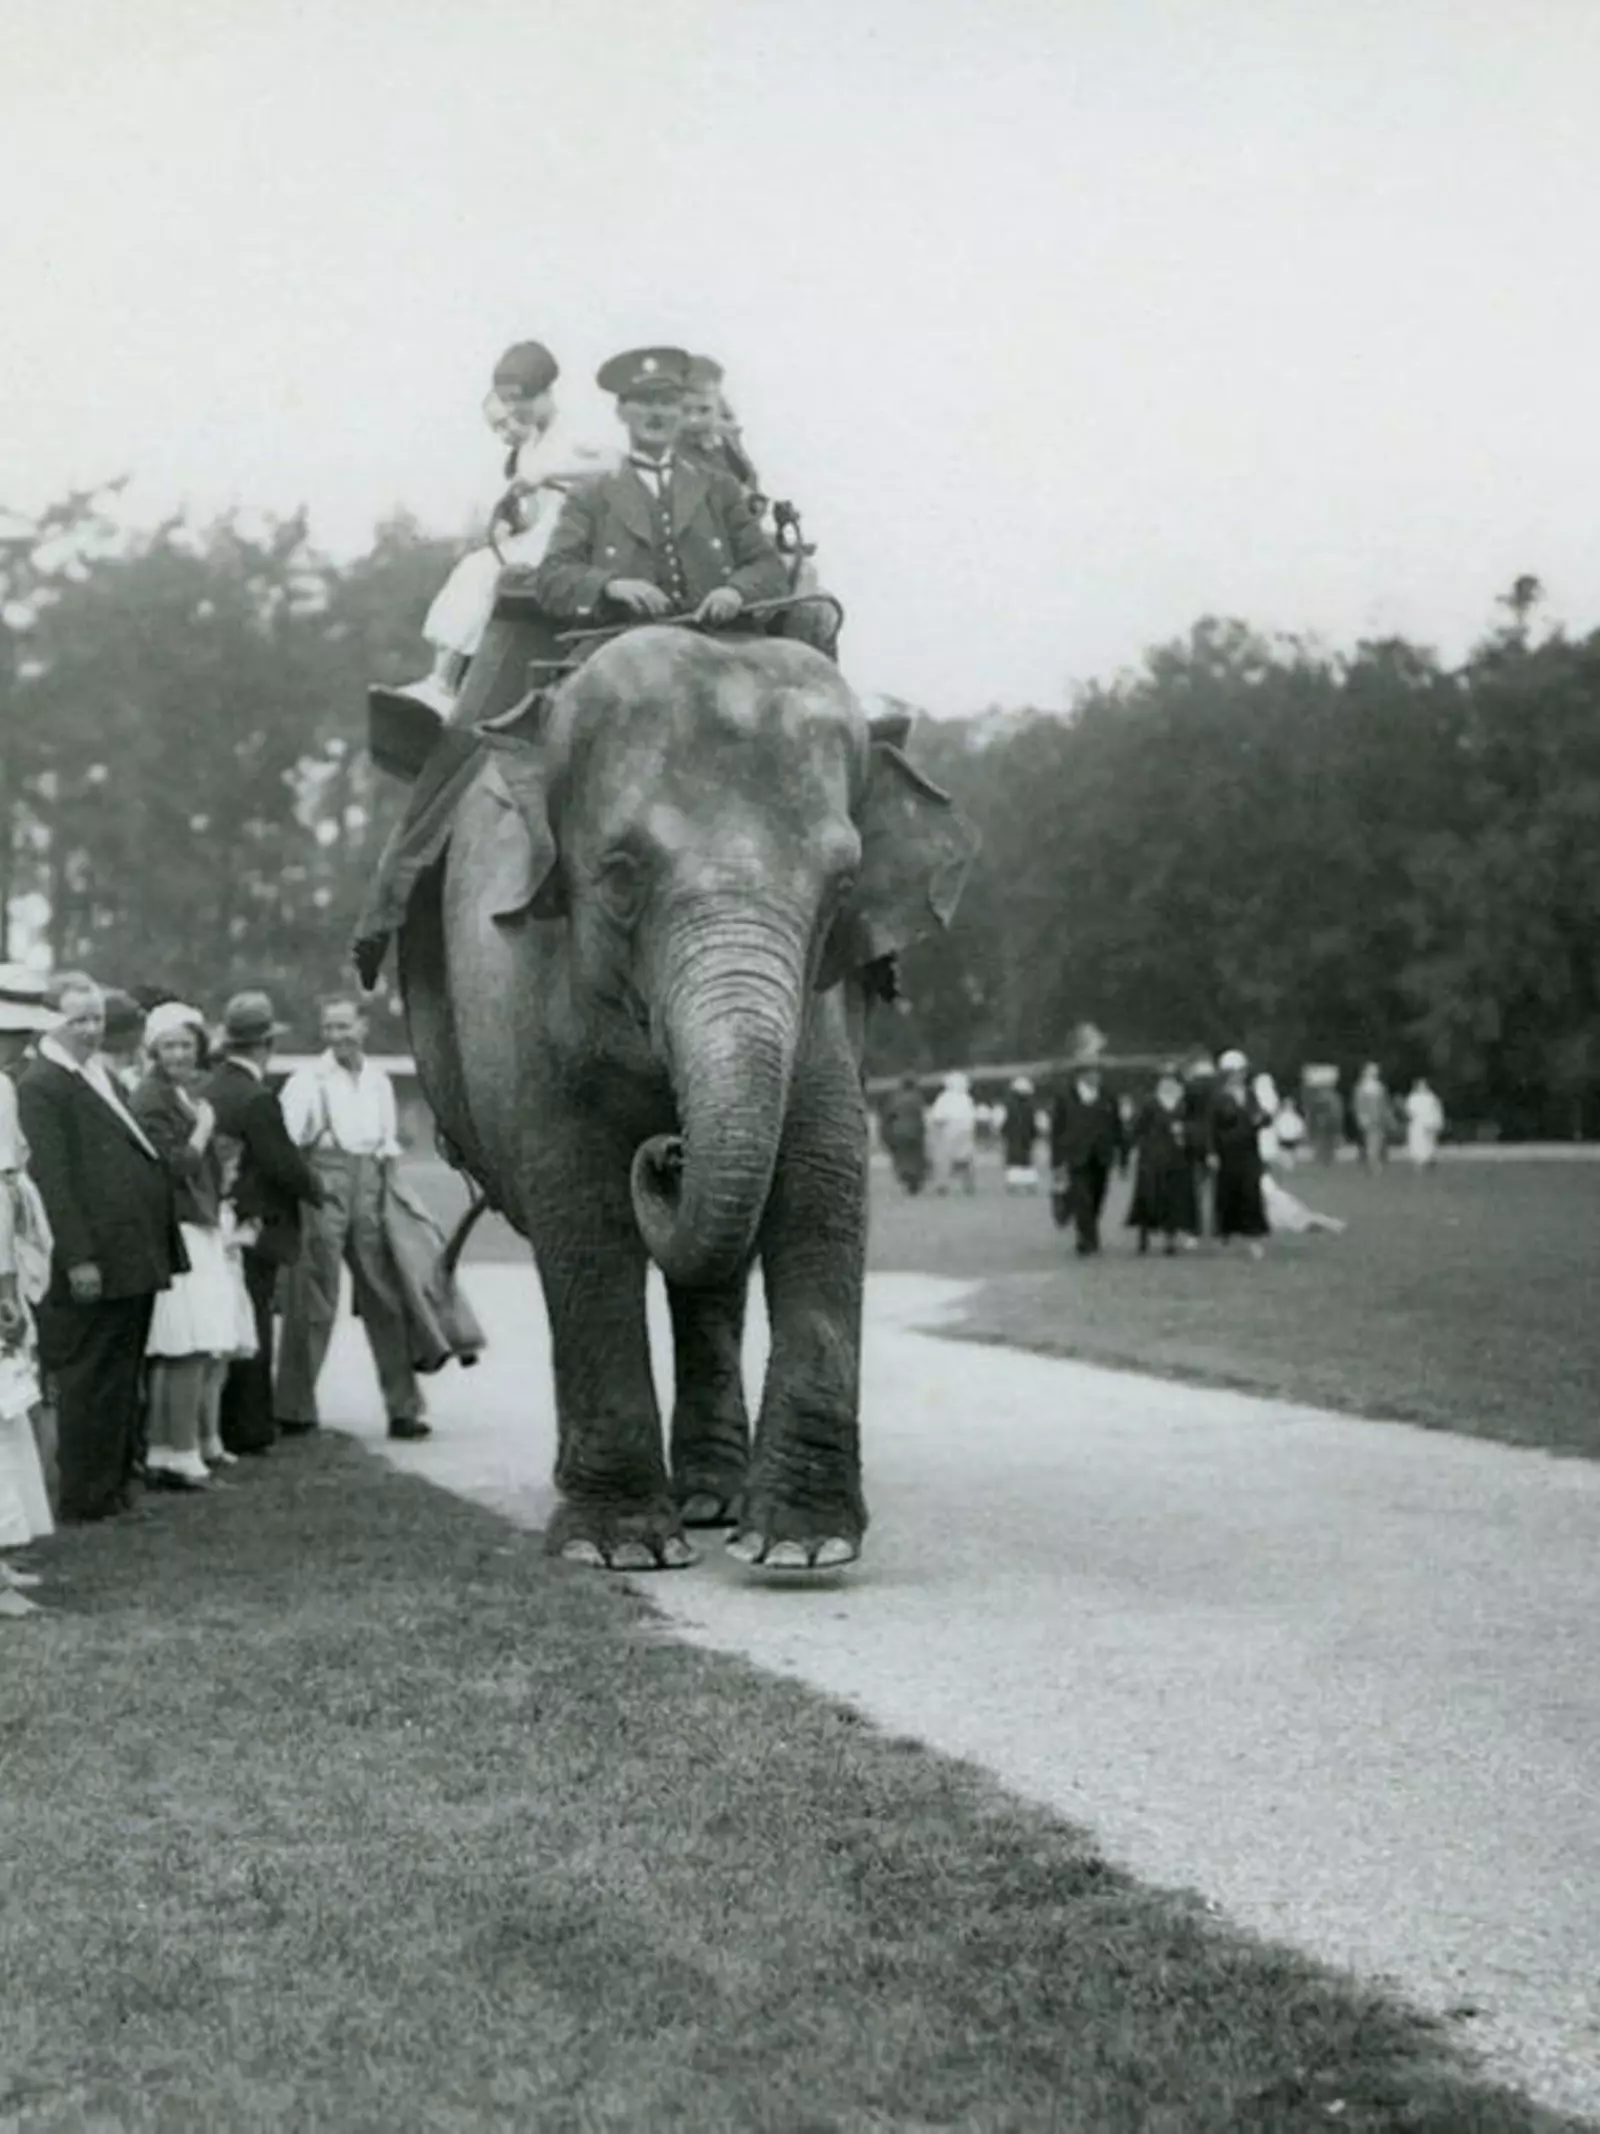 Elephant ride at Whipsnade in1936. Her handler rides astride the female Burmese Elephant's neck while visitors, including children, are seated in her howdah. Groups of other visitors stand on the short grass beside the path.